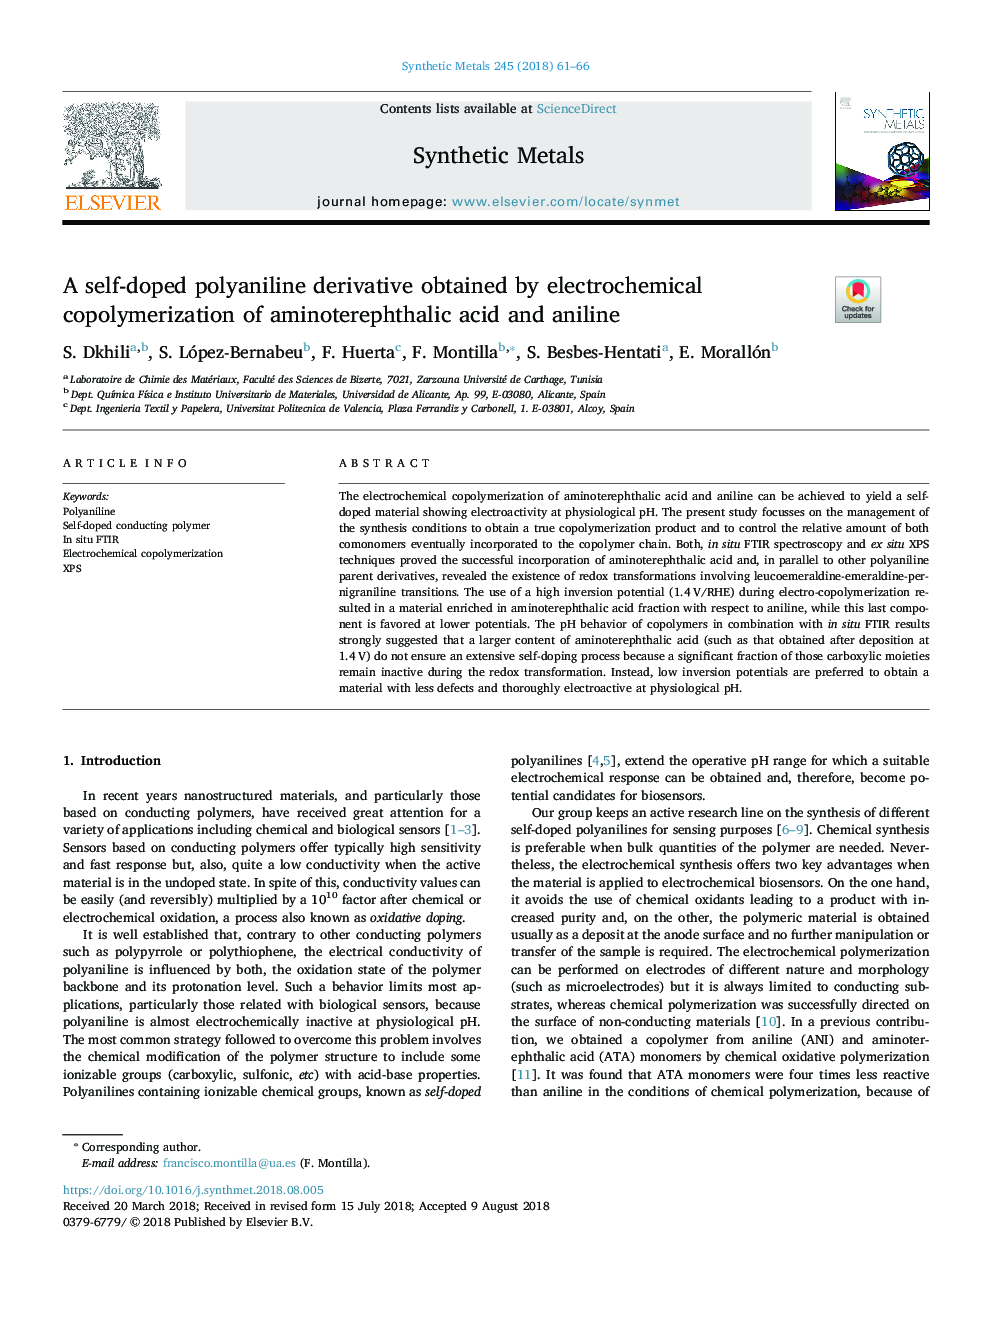 A self-doped polyaniline derivative obtained by electrochemical copolymerization of aminoterephthalic acid and aniline